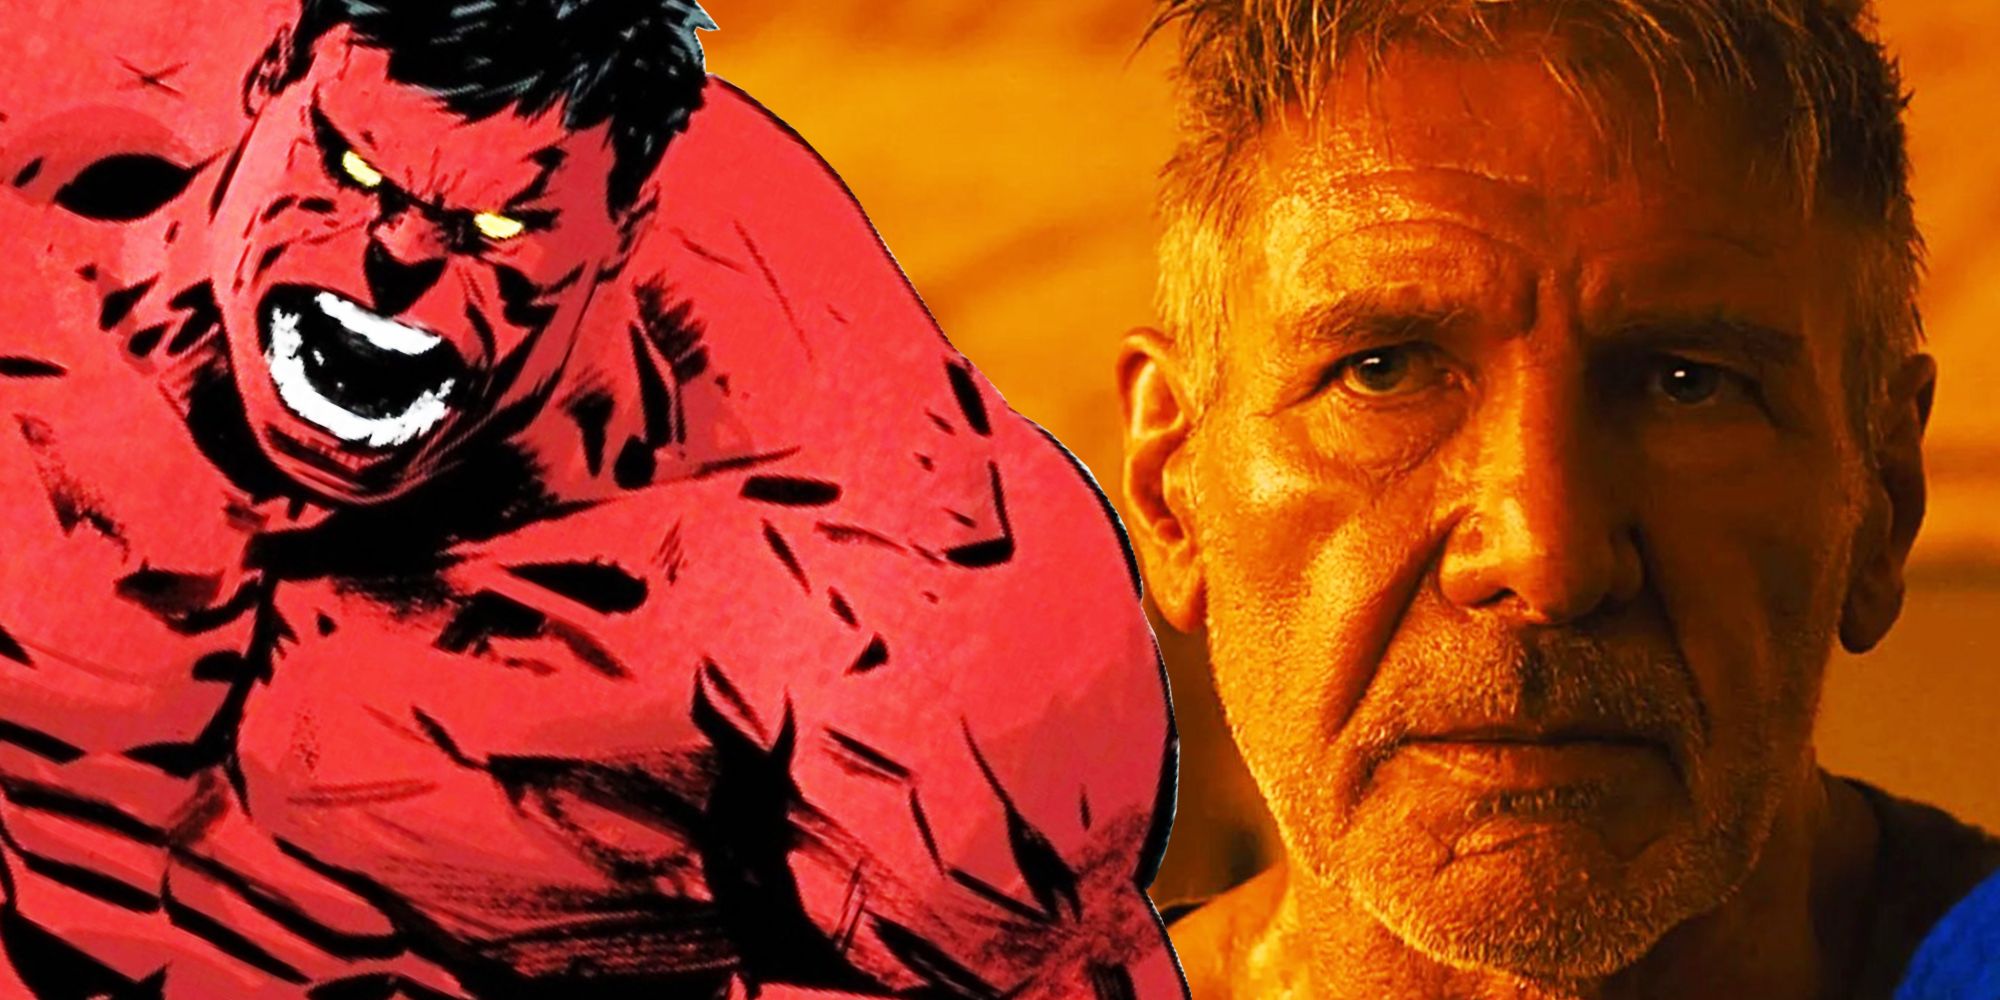 Blended image of Harrison Ford as Deckard looking neutral in Blade Runner 2049 and a comic book Red Hulk looking angry